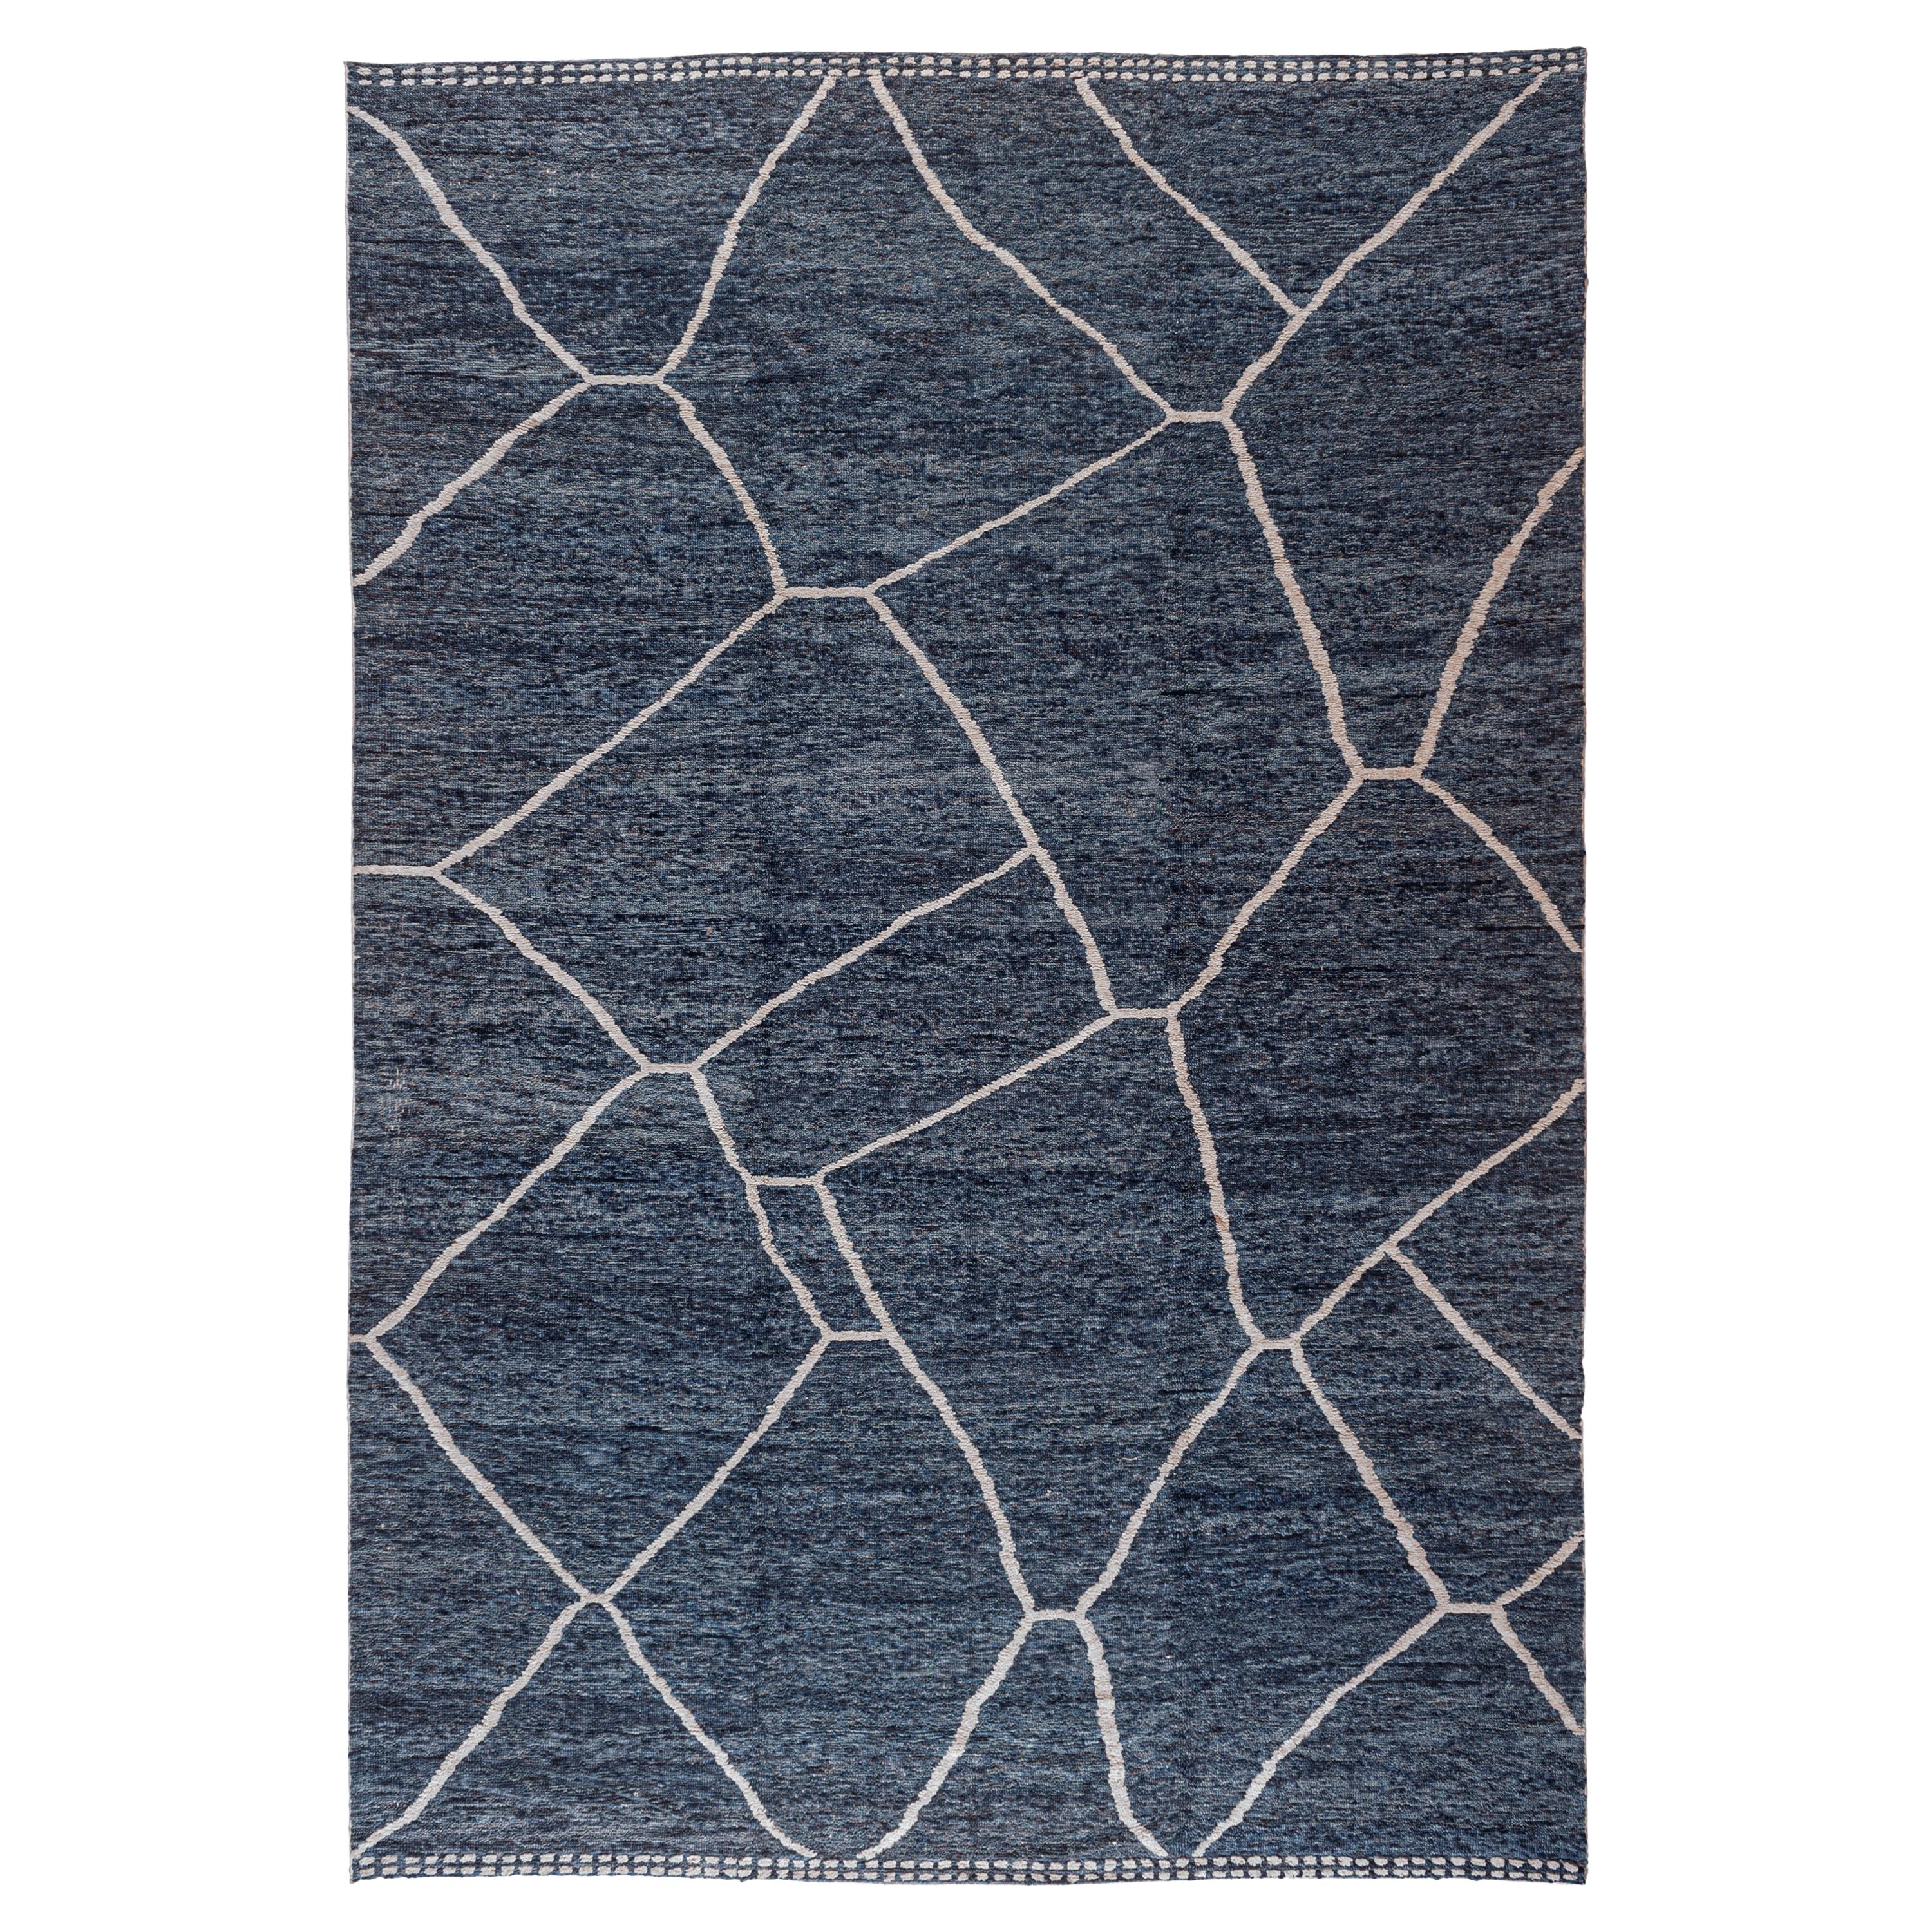 Blue Moroccan Inspired Rug